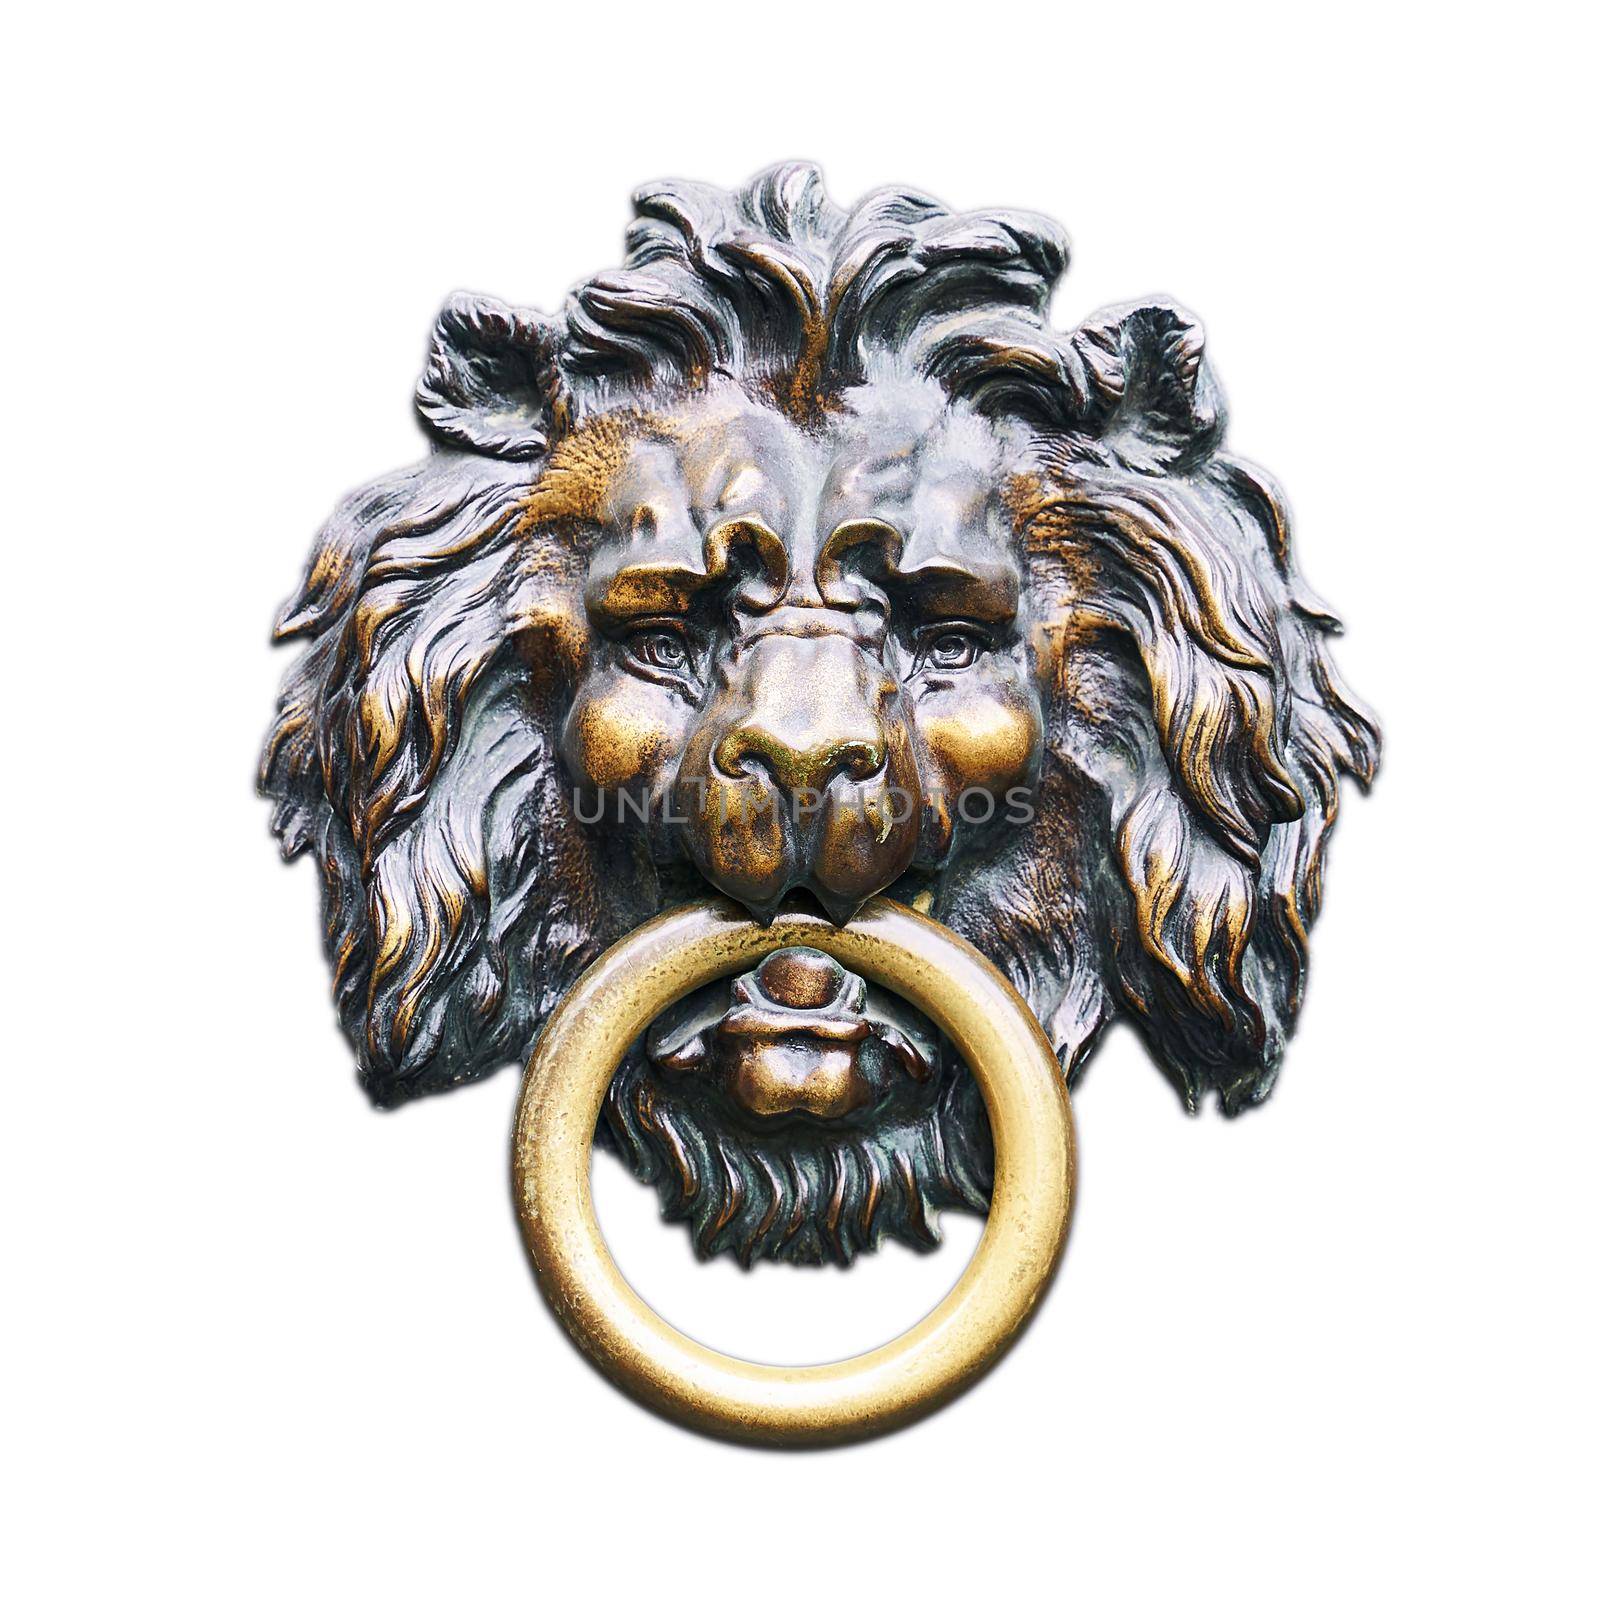 Vintage old bronze lion head isolated on white background